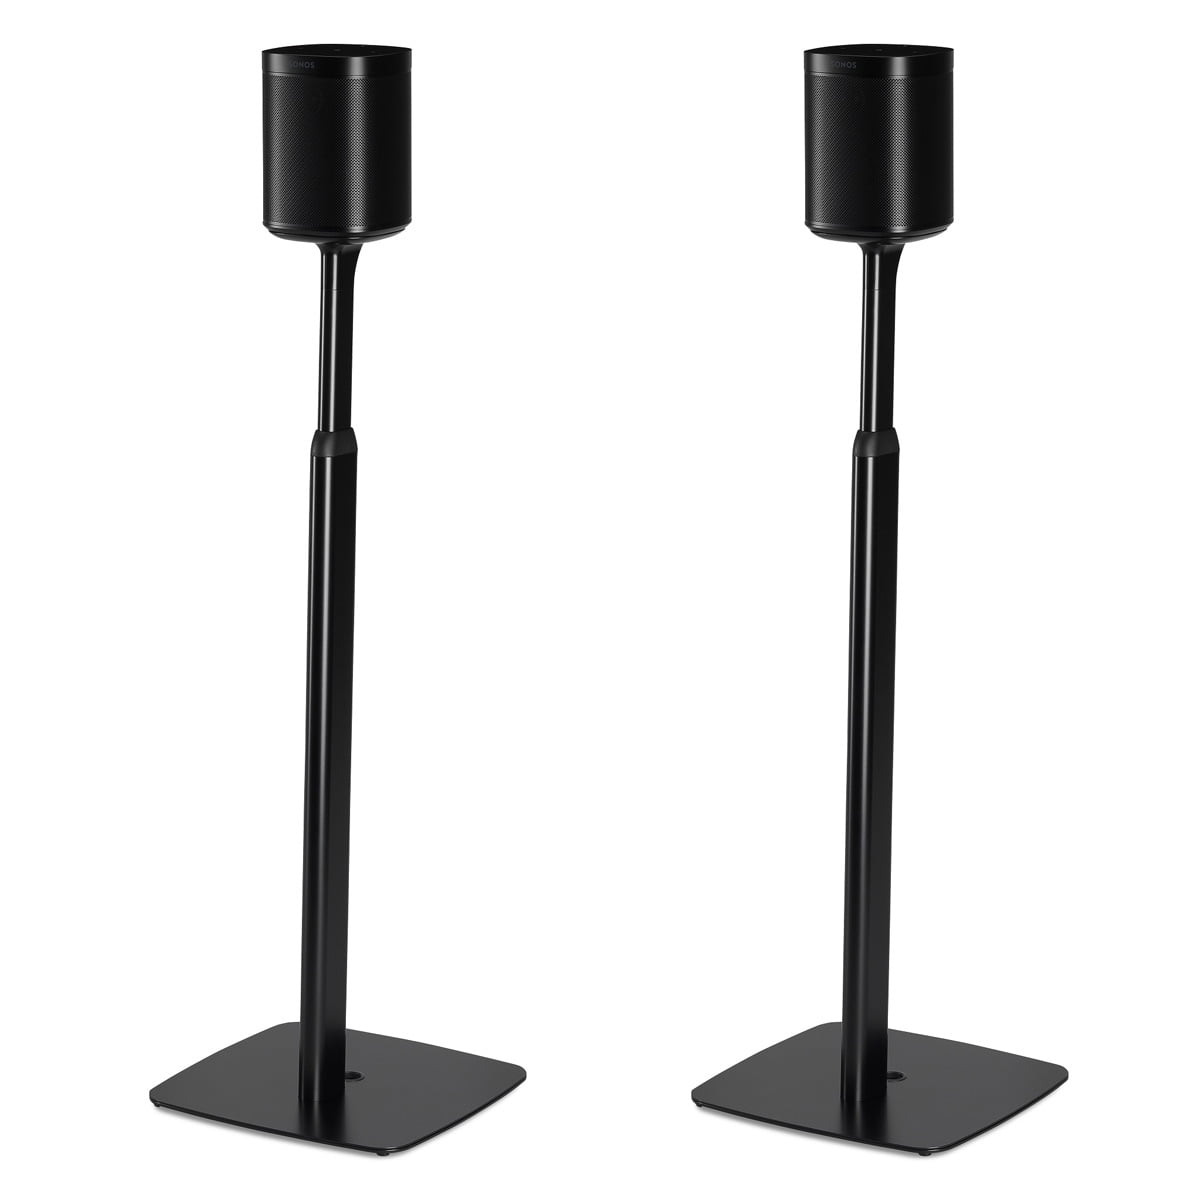 White Pair Flexson Adjustable Floor Stands for Sonos One and Sonos PLAY:1 